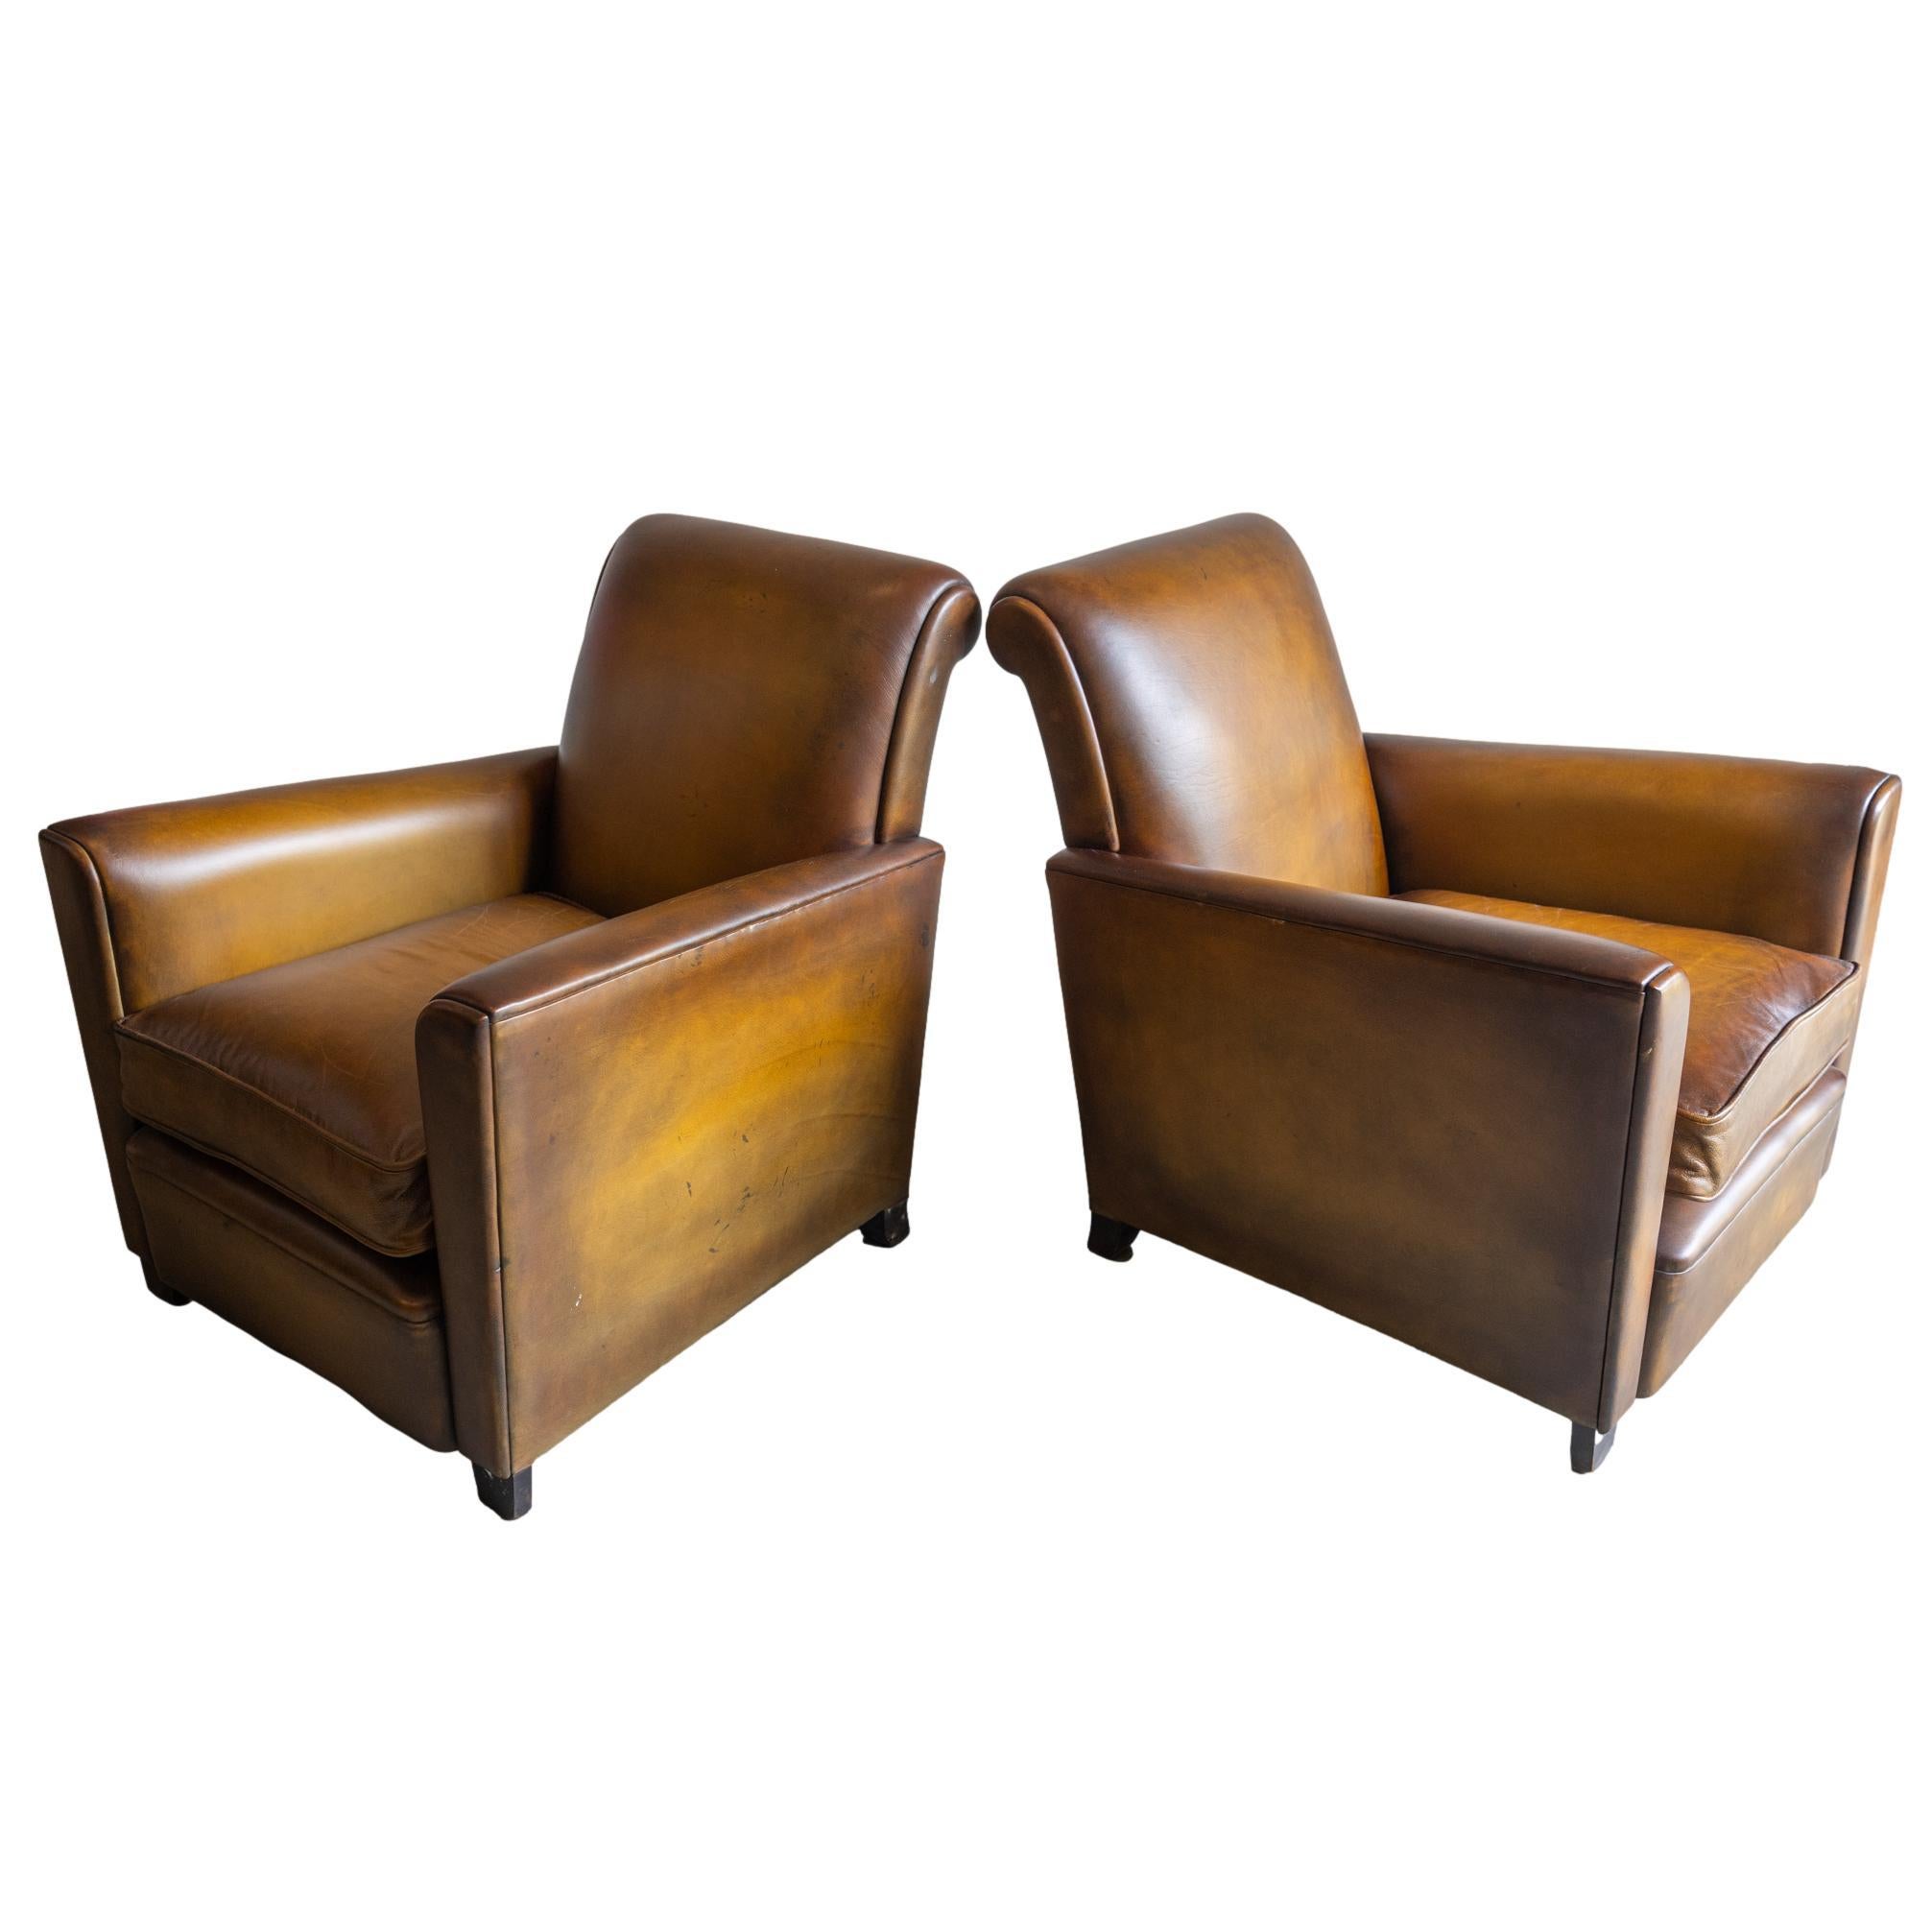 A Pair of Art Deco Leather Club Chairs, French, ca. 1935 In Good Condition For Sale In Banner Elk, NC